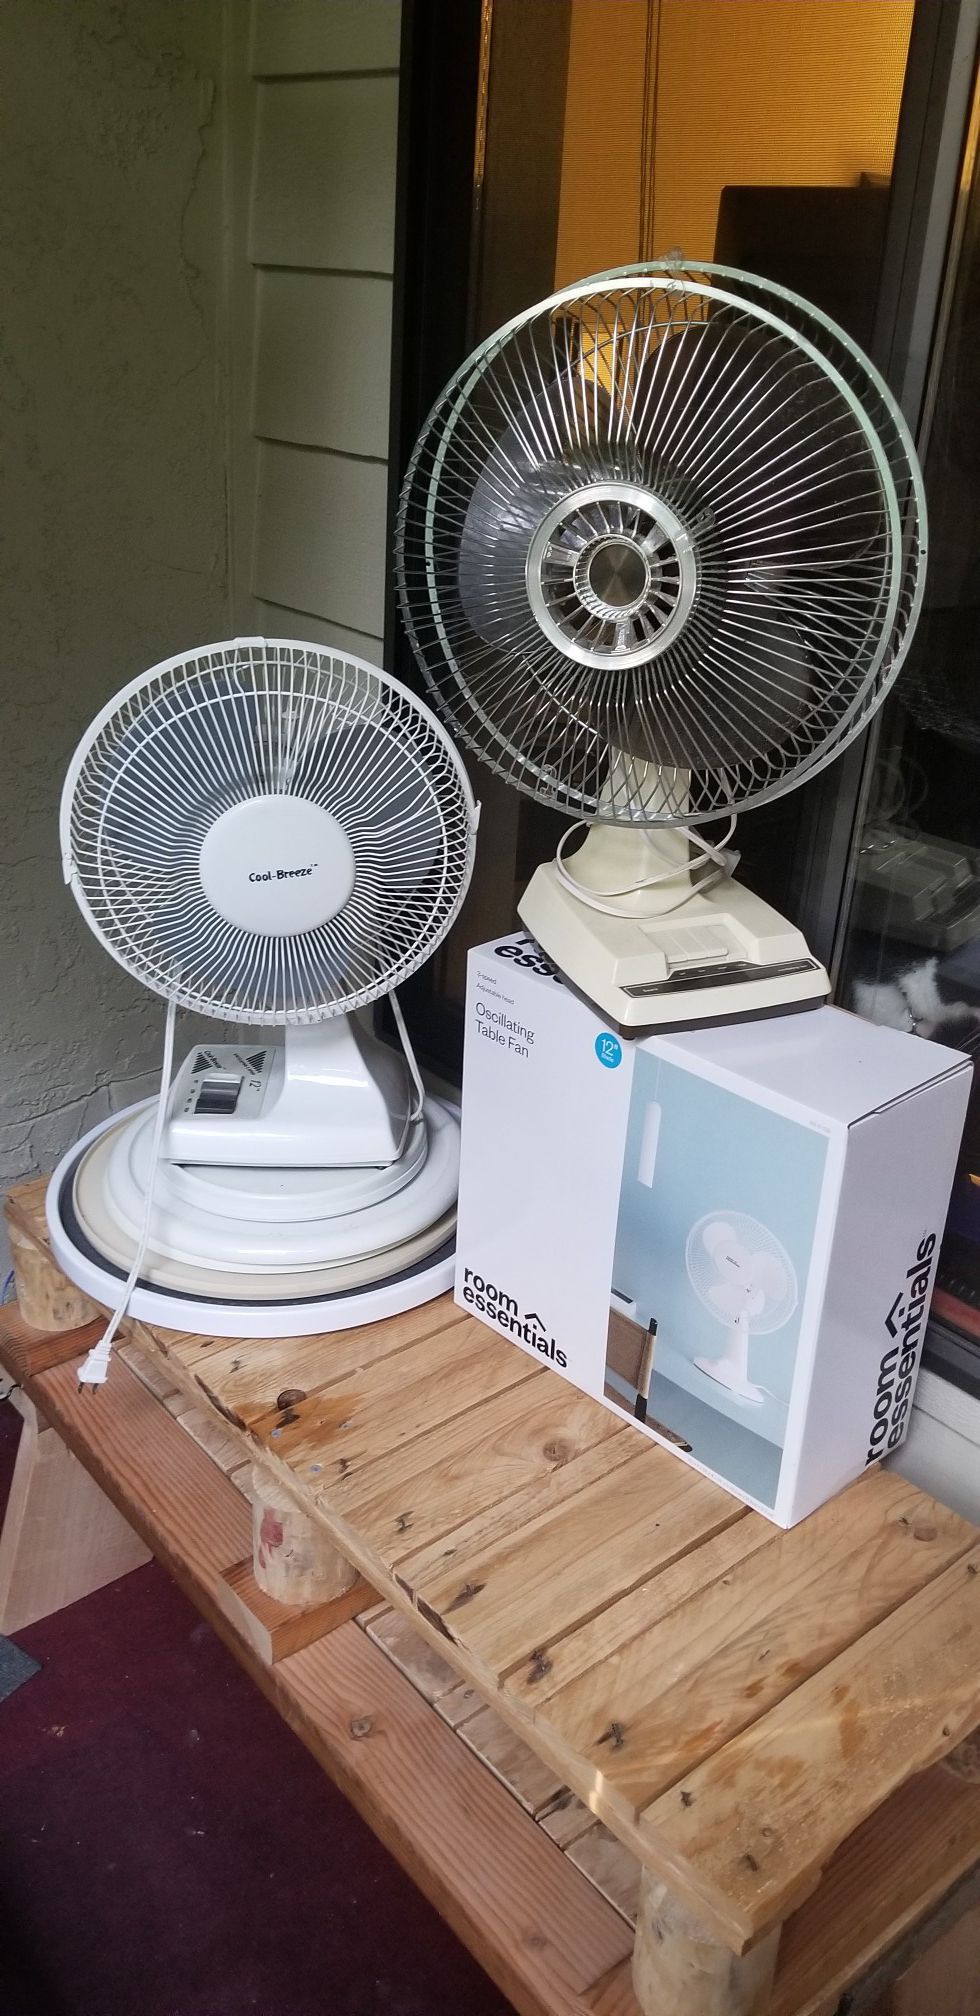 Free standing fans